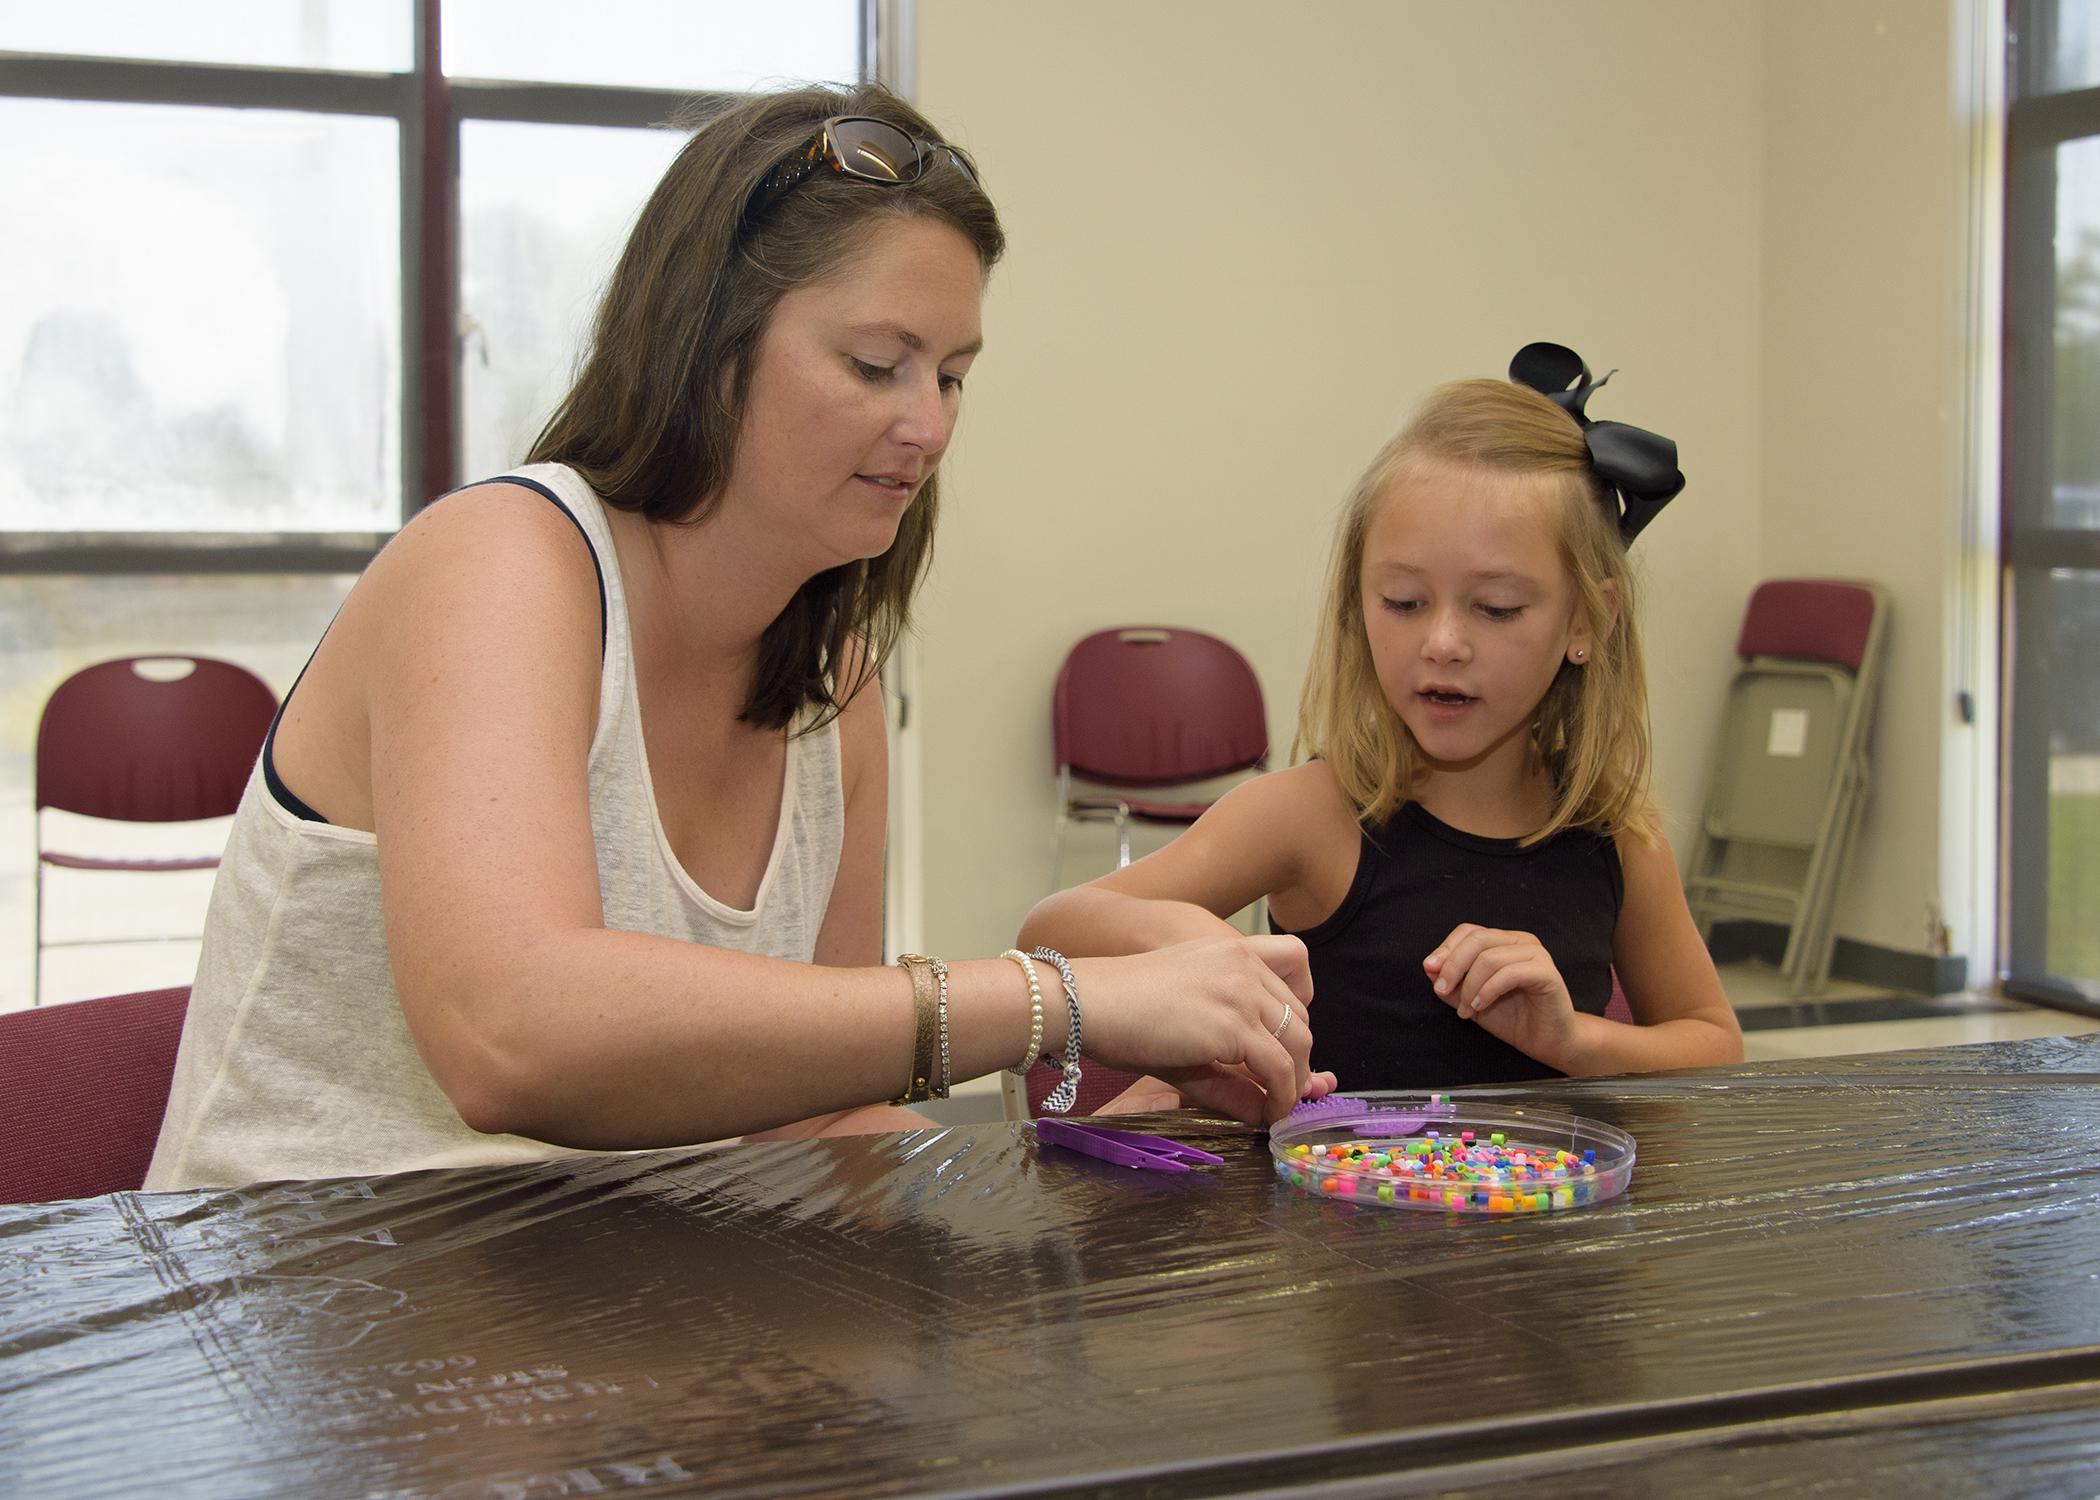 A parent's involvement can make any activity a learning experience. Jaden Claire Everett, 5, fashions a dog out of beads as her mother, Jana Carolyn Everett, assists. (Photo by MSU Ag Communications/Kevin Hudson)